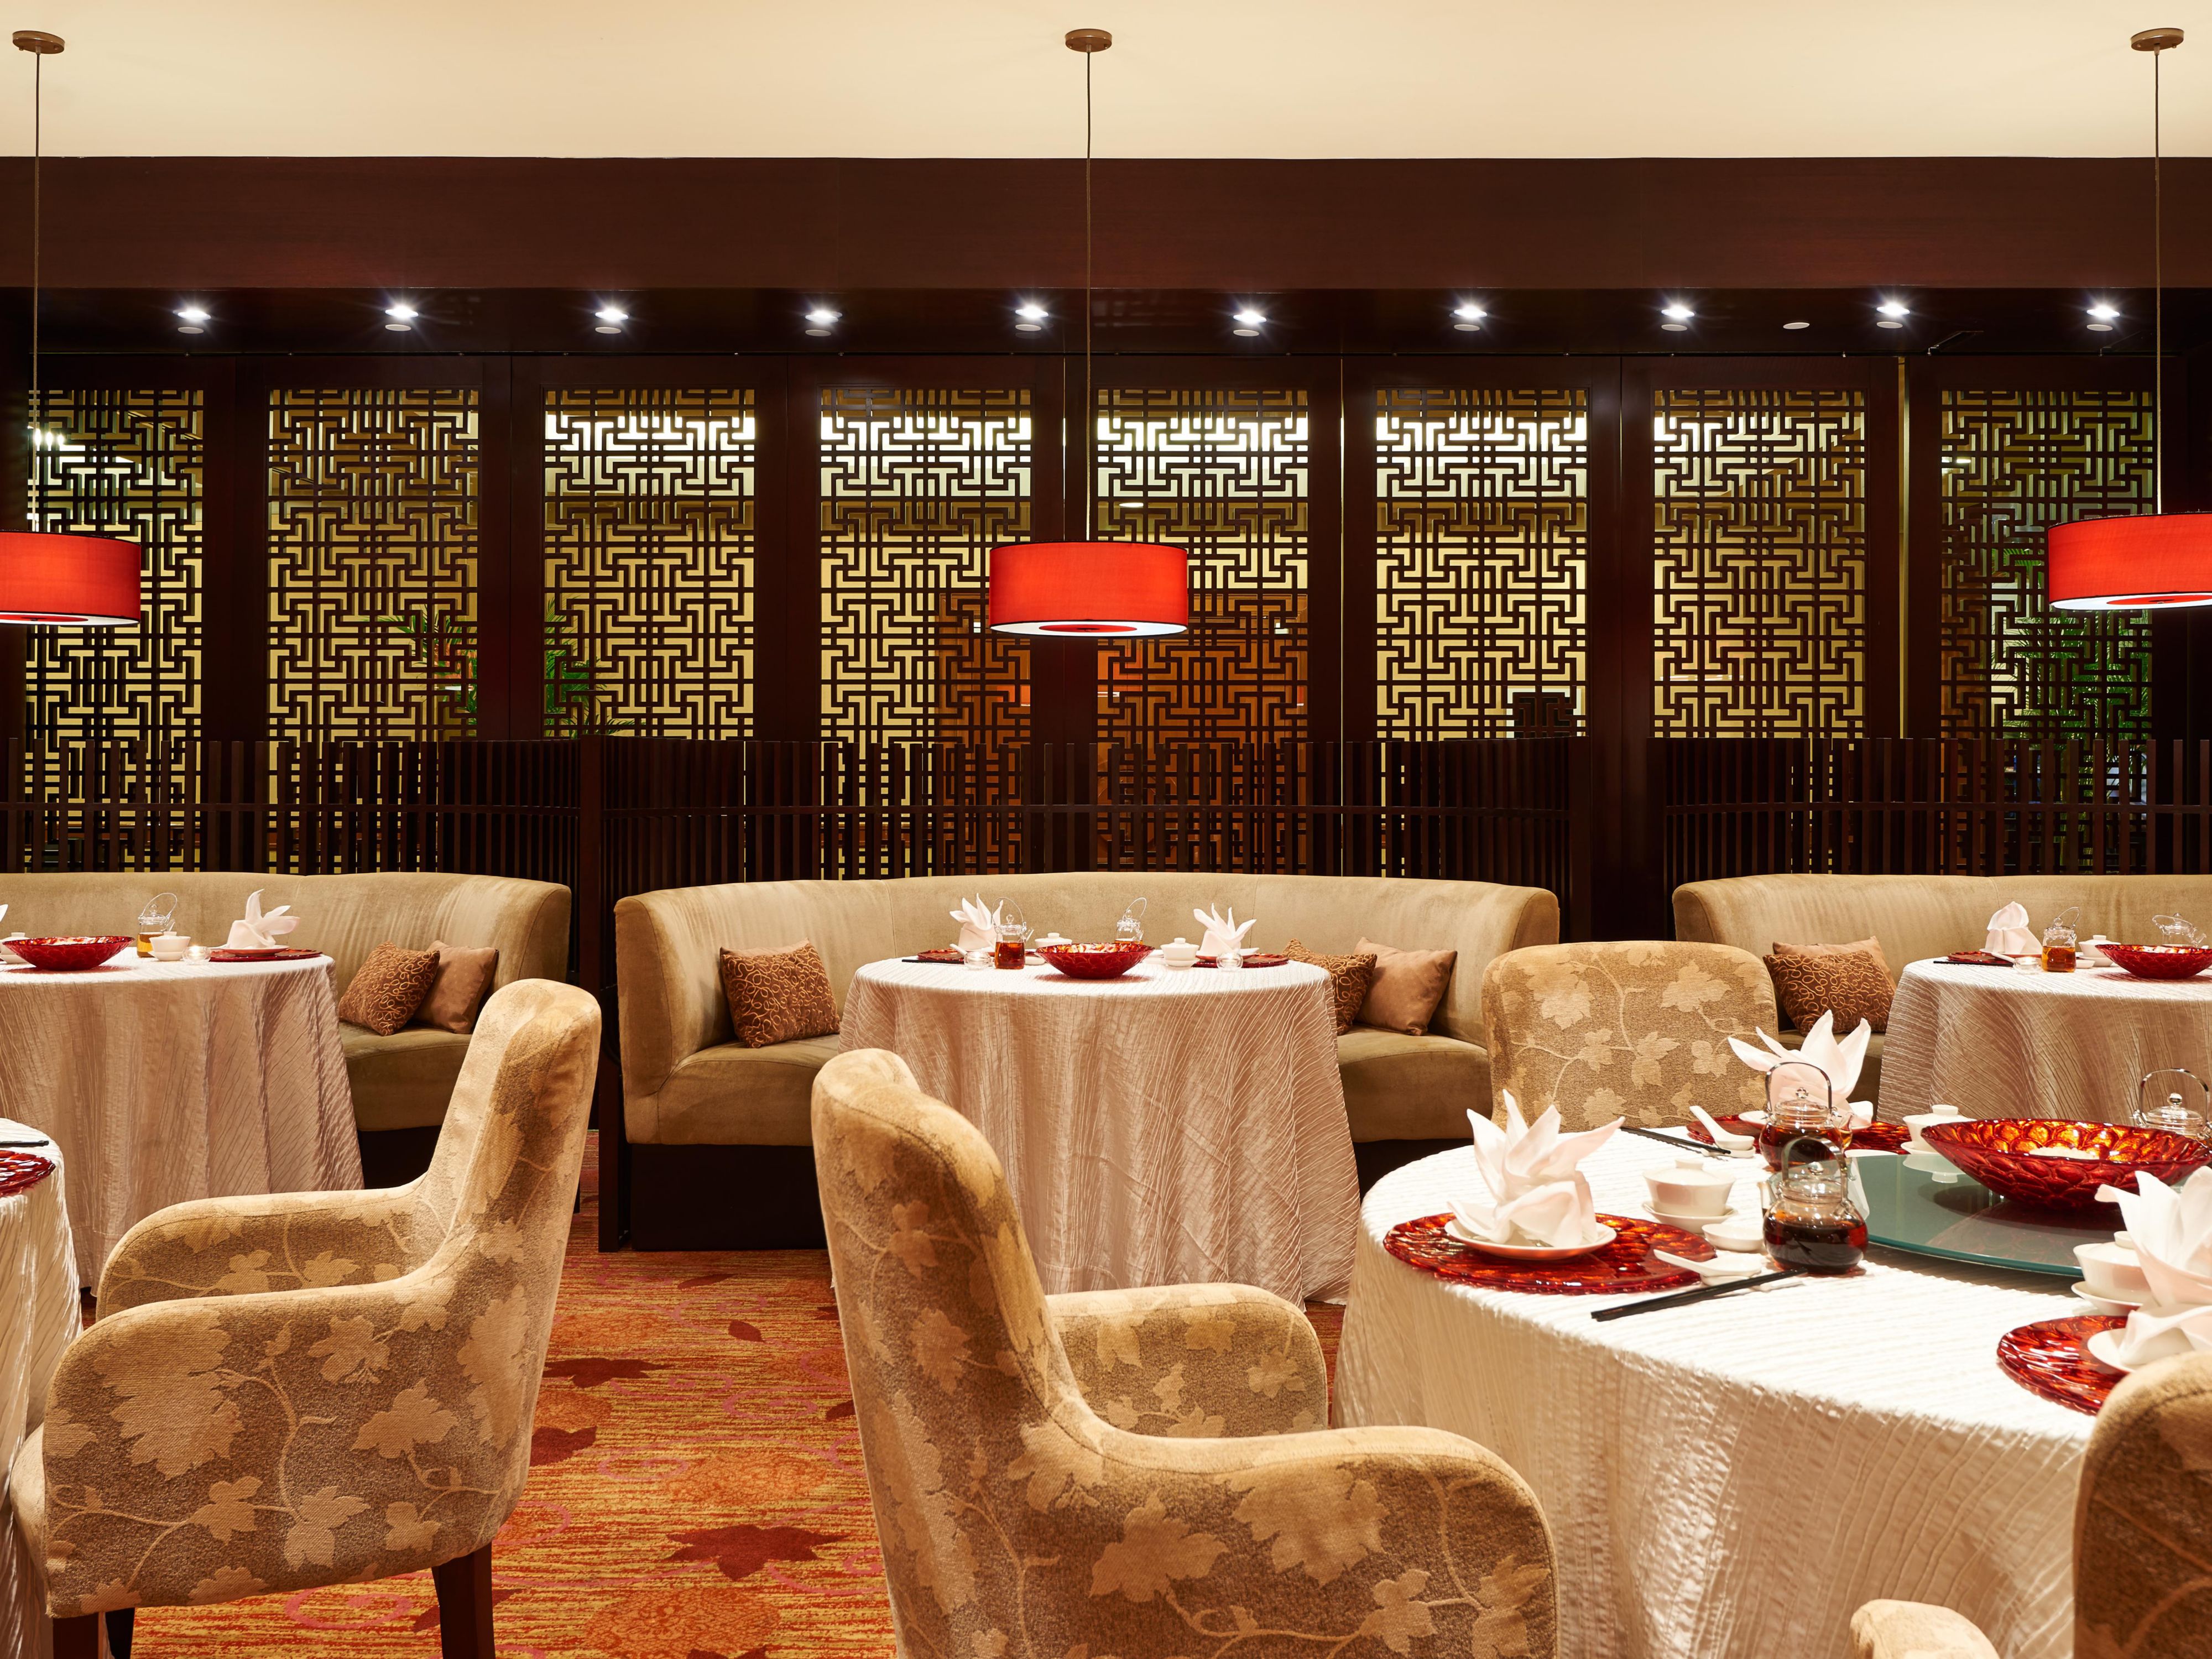 Established in 1990, this award-winning restaurant takes pride in serving authentic Cantonese cuisine. Whet your appetite with our signature ‘Home-Style’ Roasted Duck with Tea Leaves and be enthralled by the range of handmade dim sum creations.